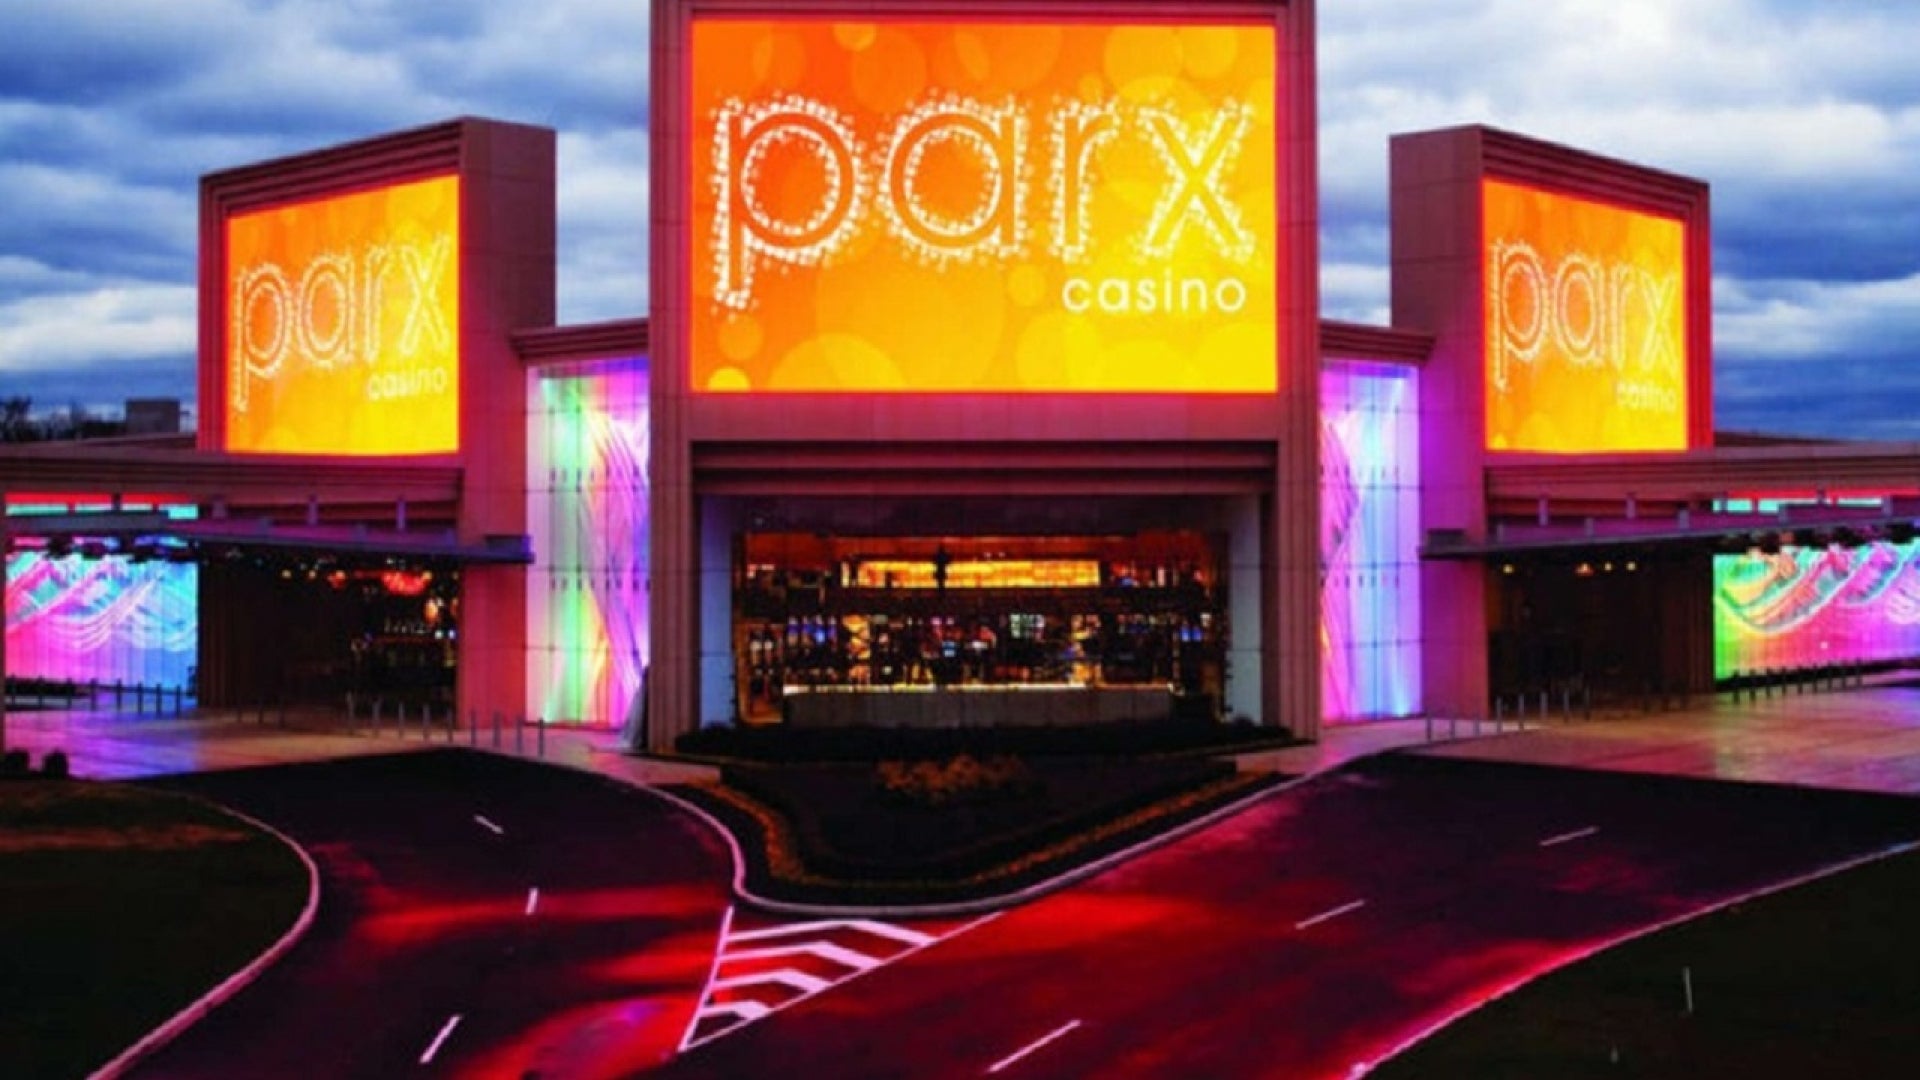 buses to parx casino from nj